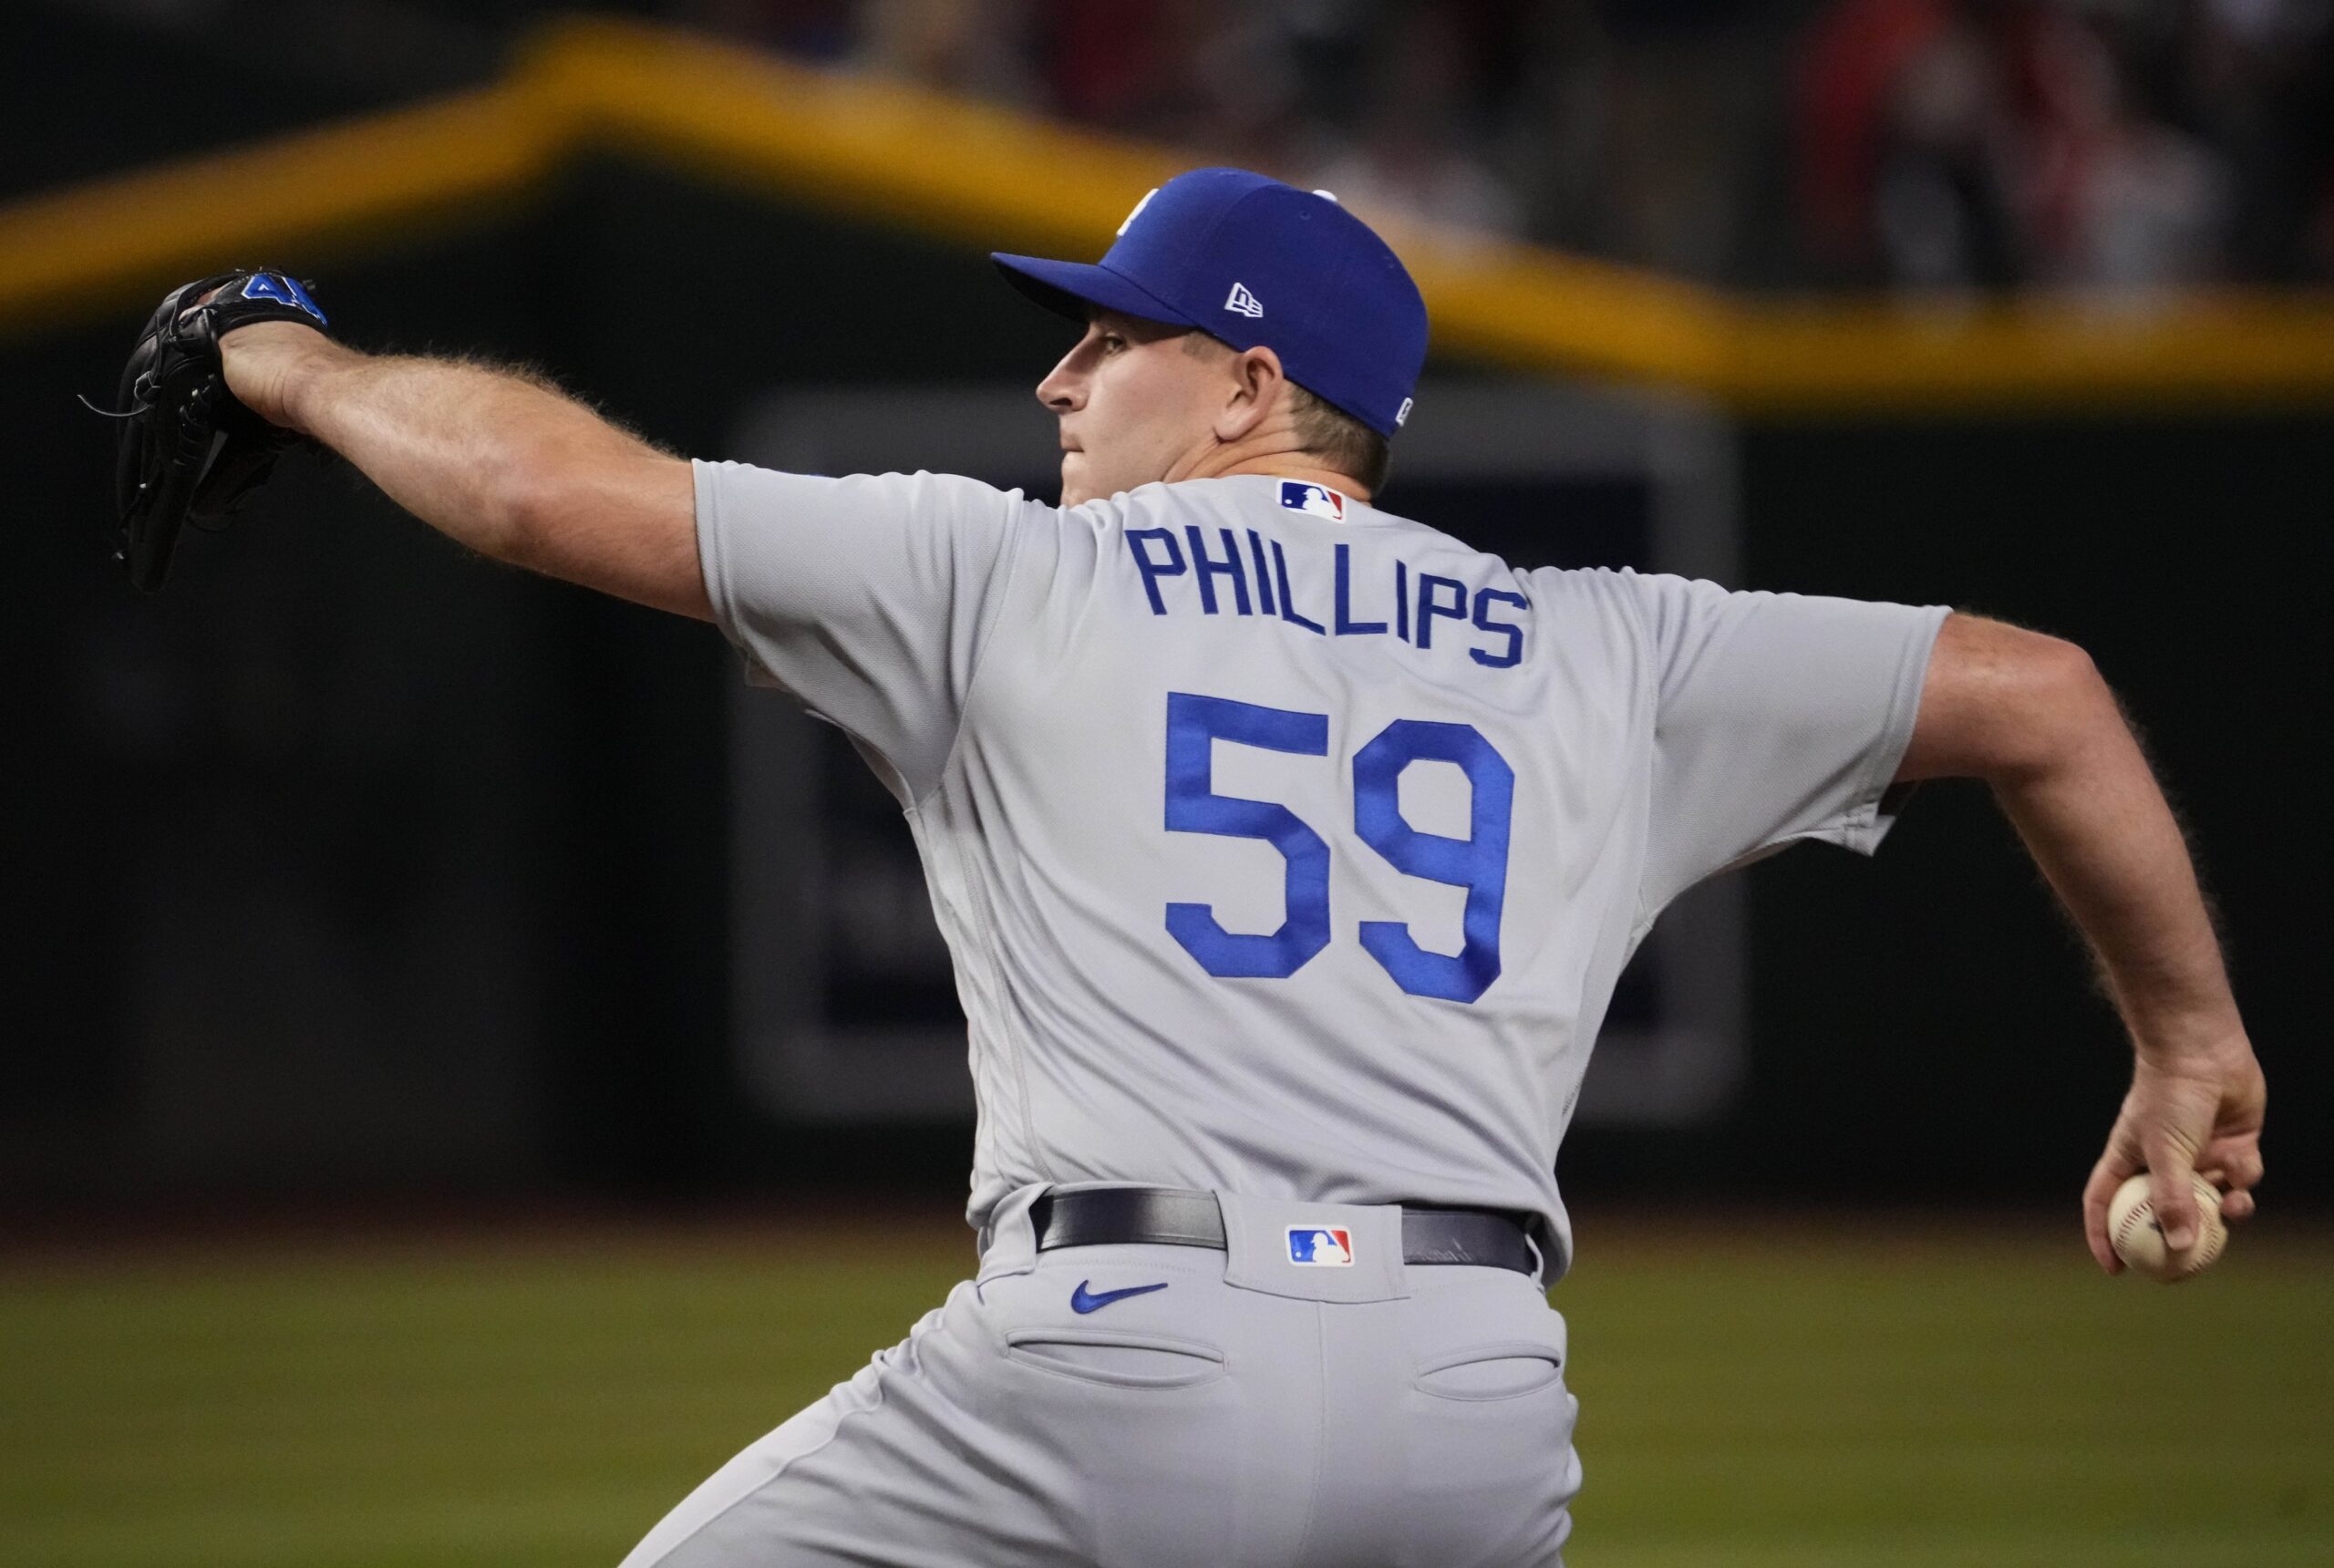 Dodgers News: Evan Phillips Credits Early Career Struggles for Turning Him Into Dominant Reliever